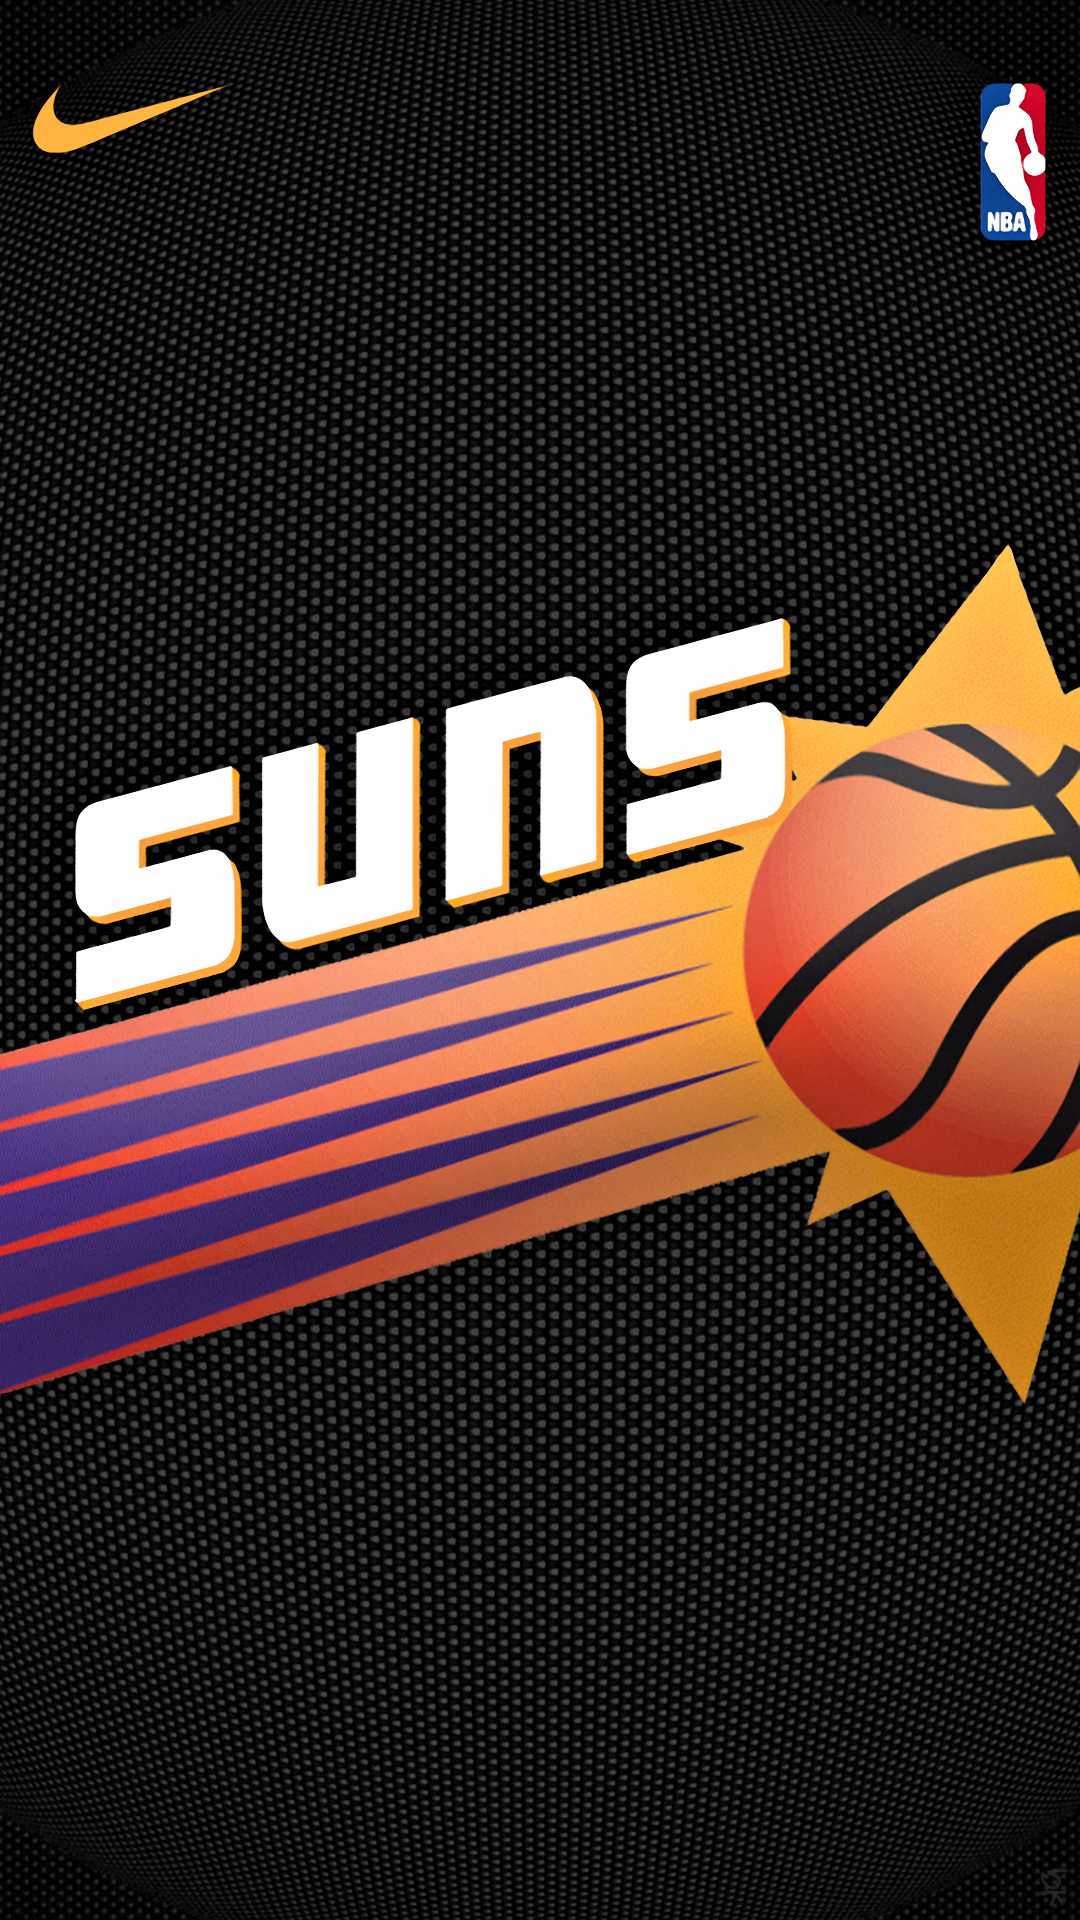 Phoenix Suns Png.626916 080×920 Pixels. Phoenix Suns, Phoenix Suns Basketball, Nba Picture